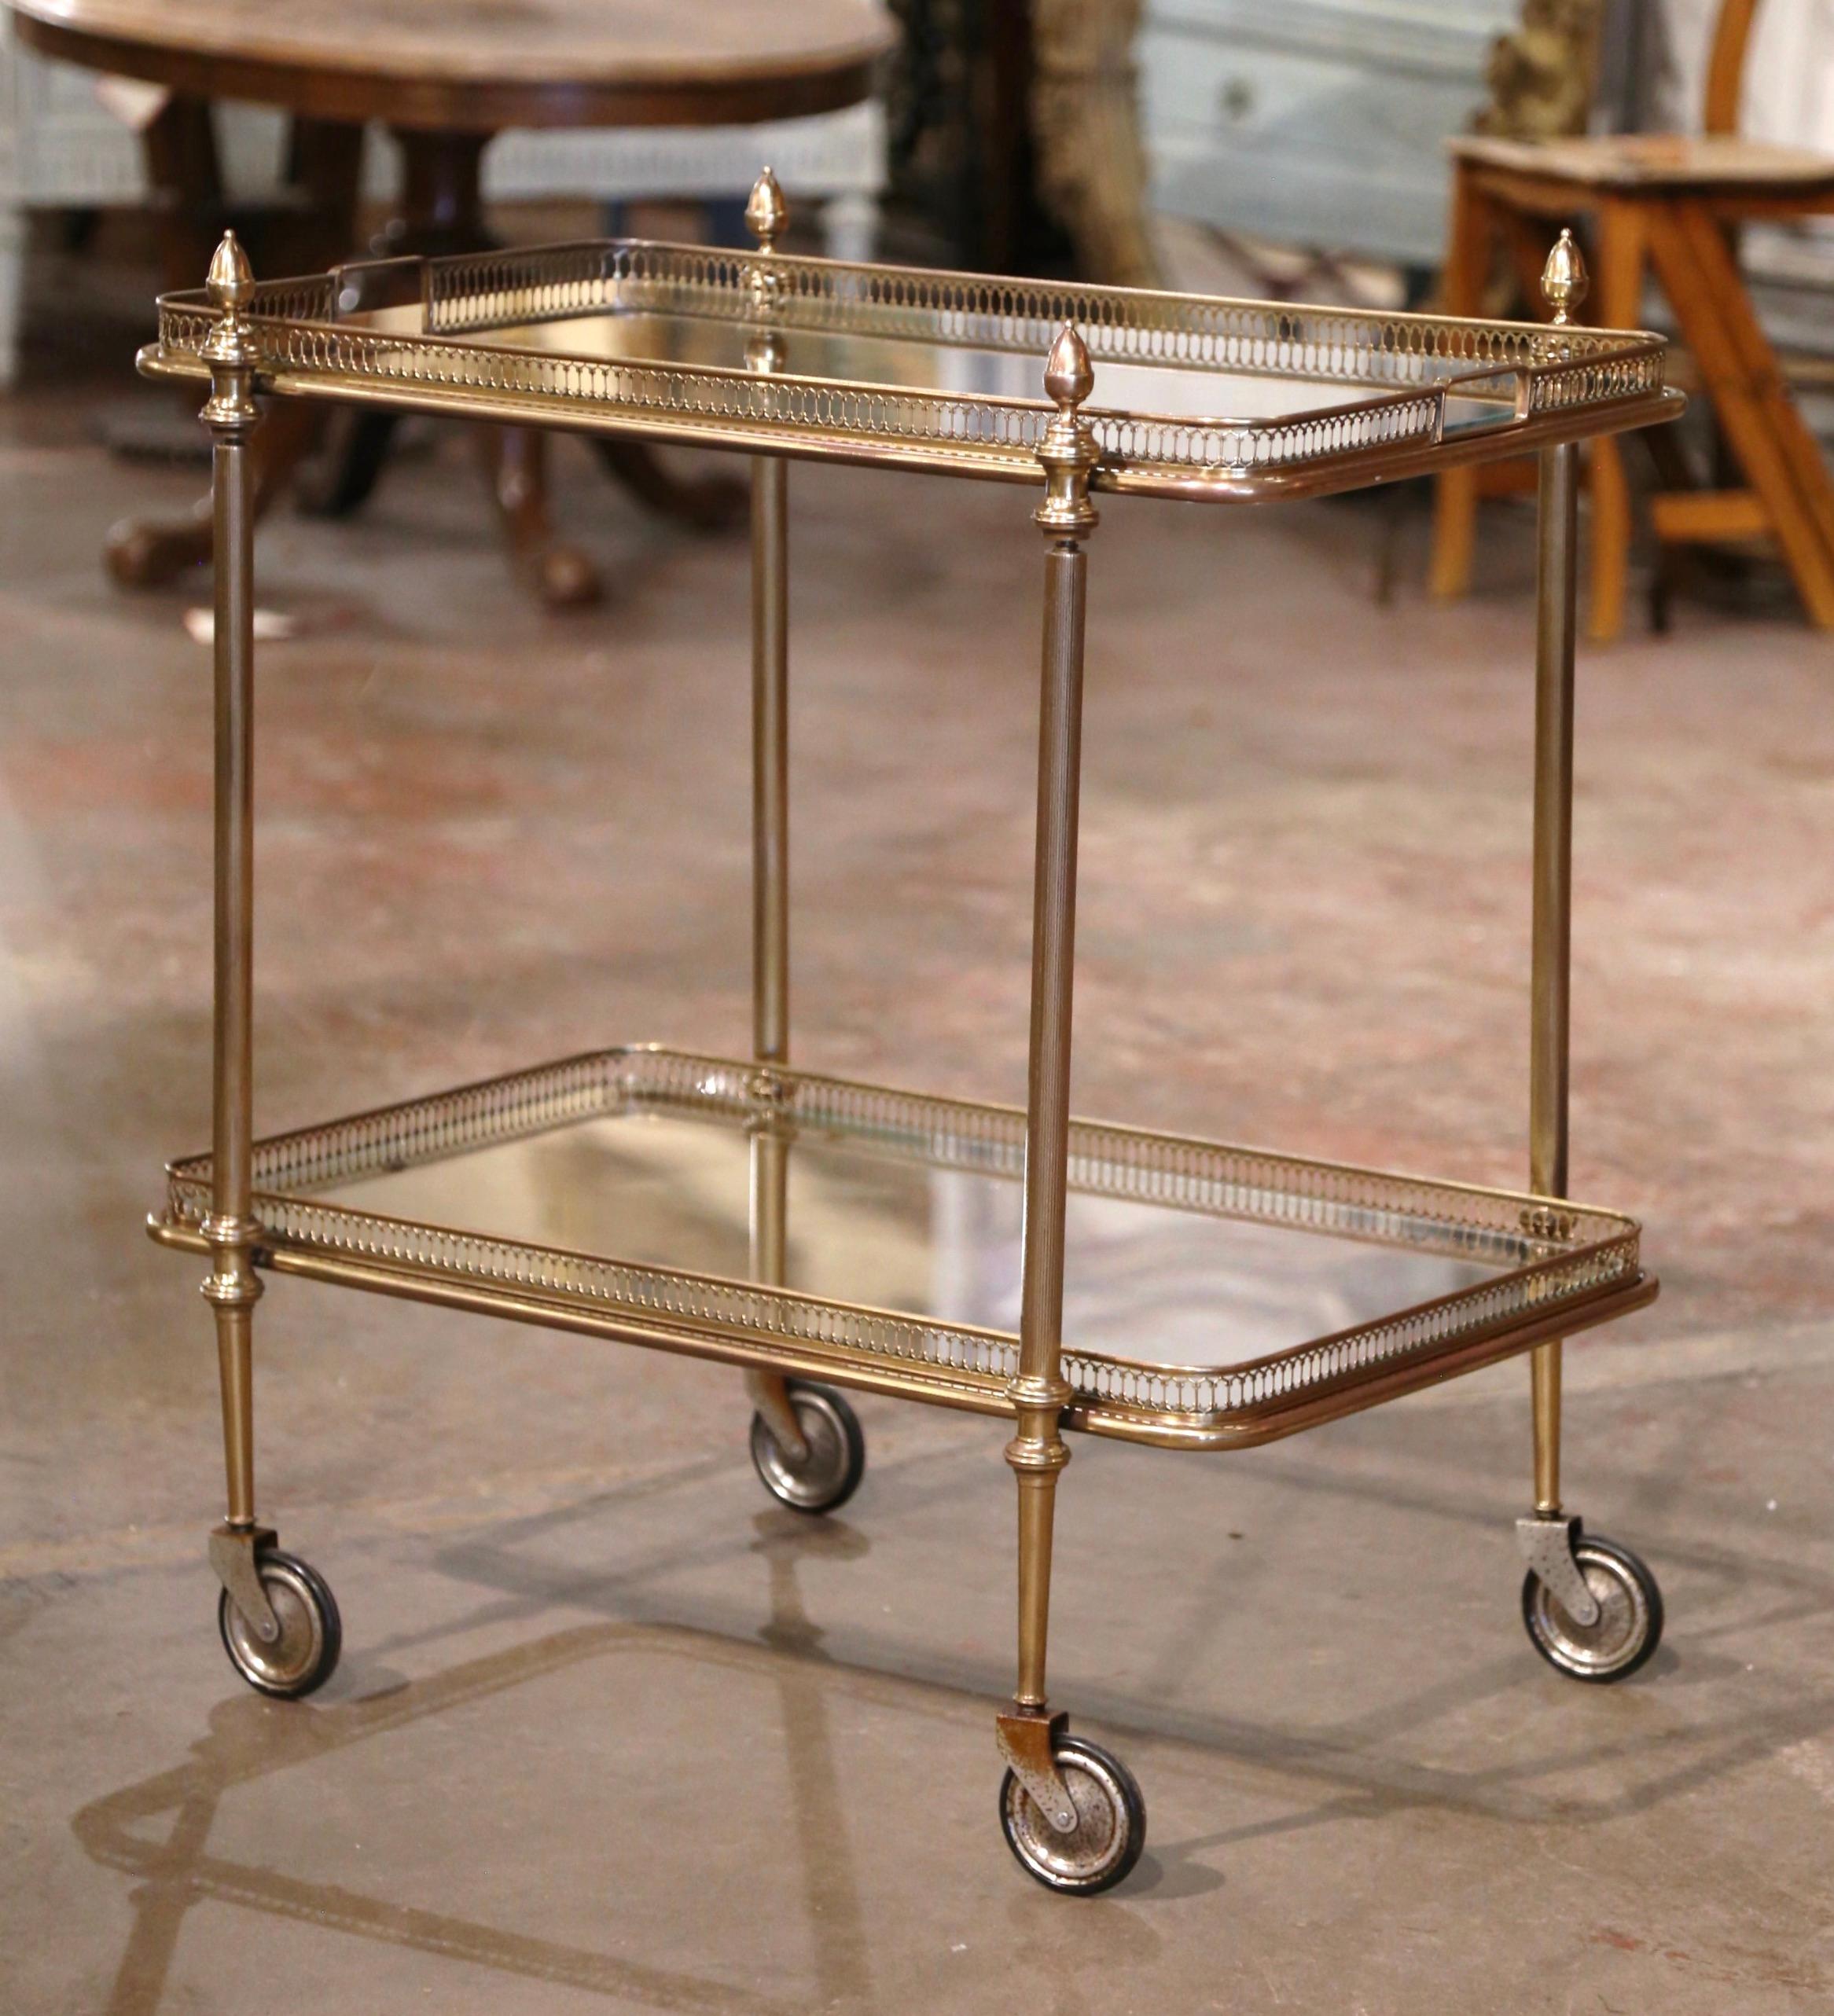 This elegant vintage rolling bar cart was created in France, circa 1930. Built in brass and rectangular in shape, the two-tier plateau trolley stands fluted legs topped with decorative finials, and ending with small round wheels and rubber tires.